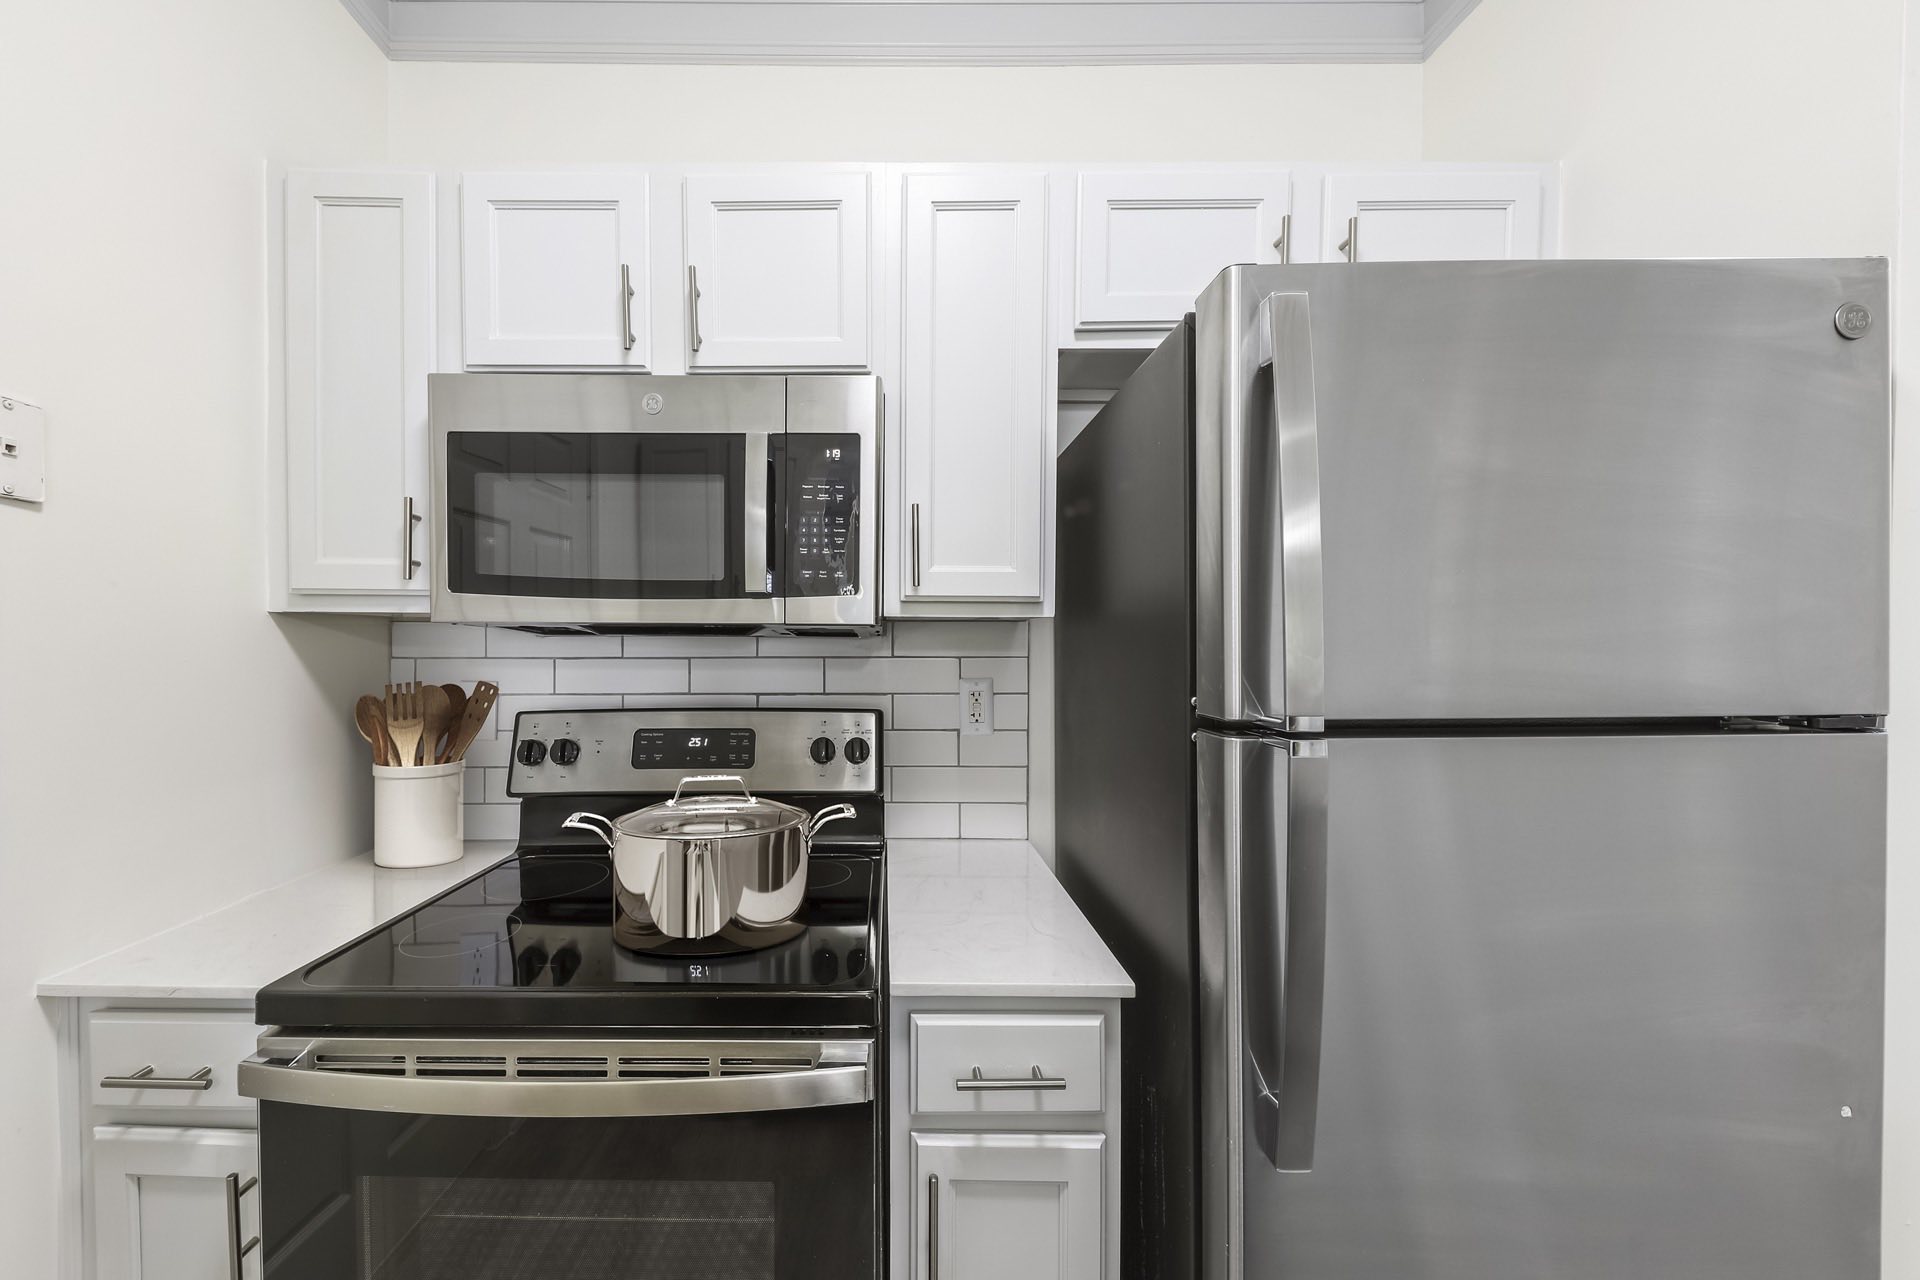 white shaker cabinets, stainless appliances and built-in microwave